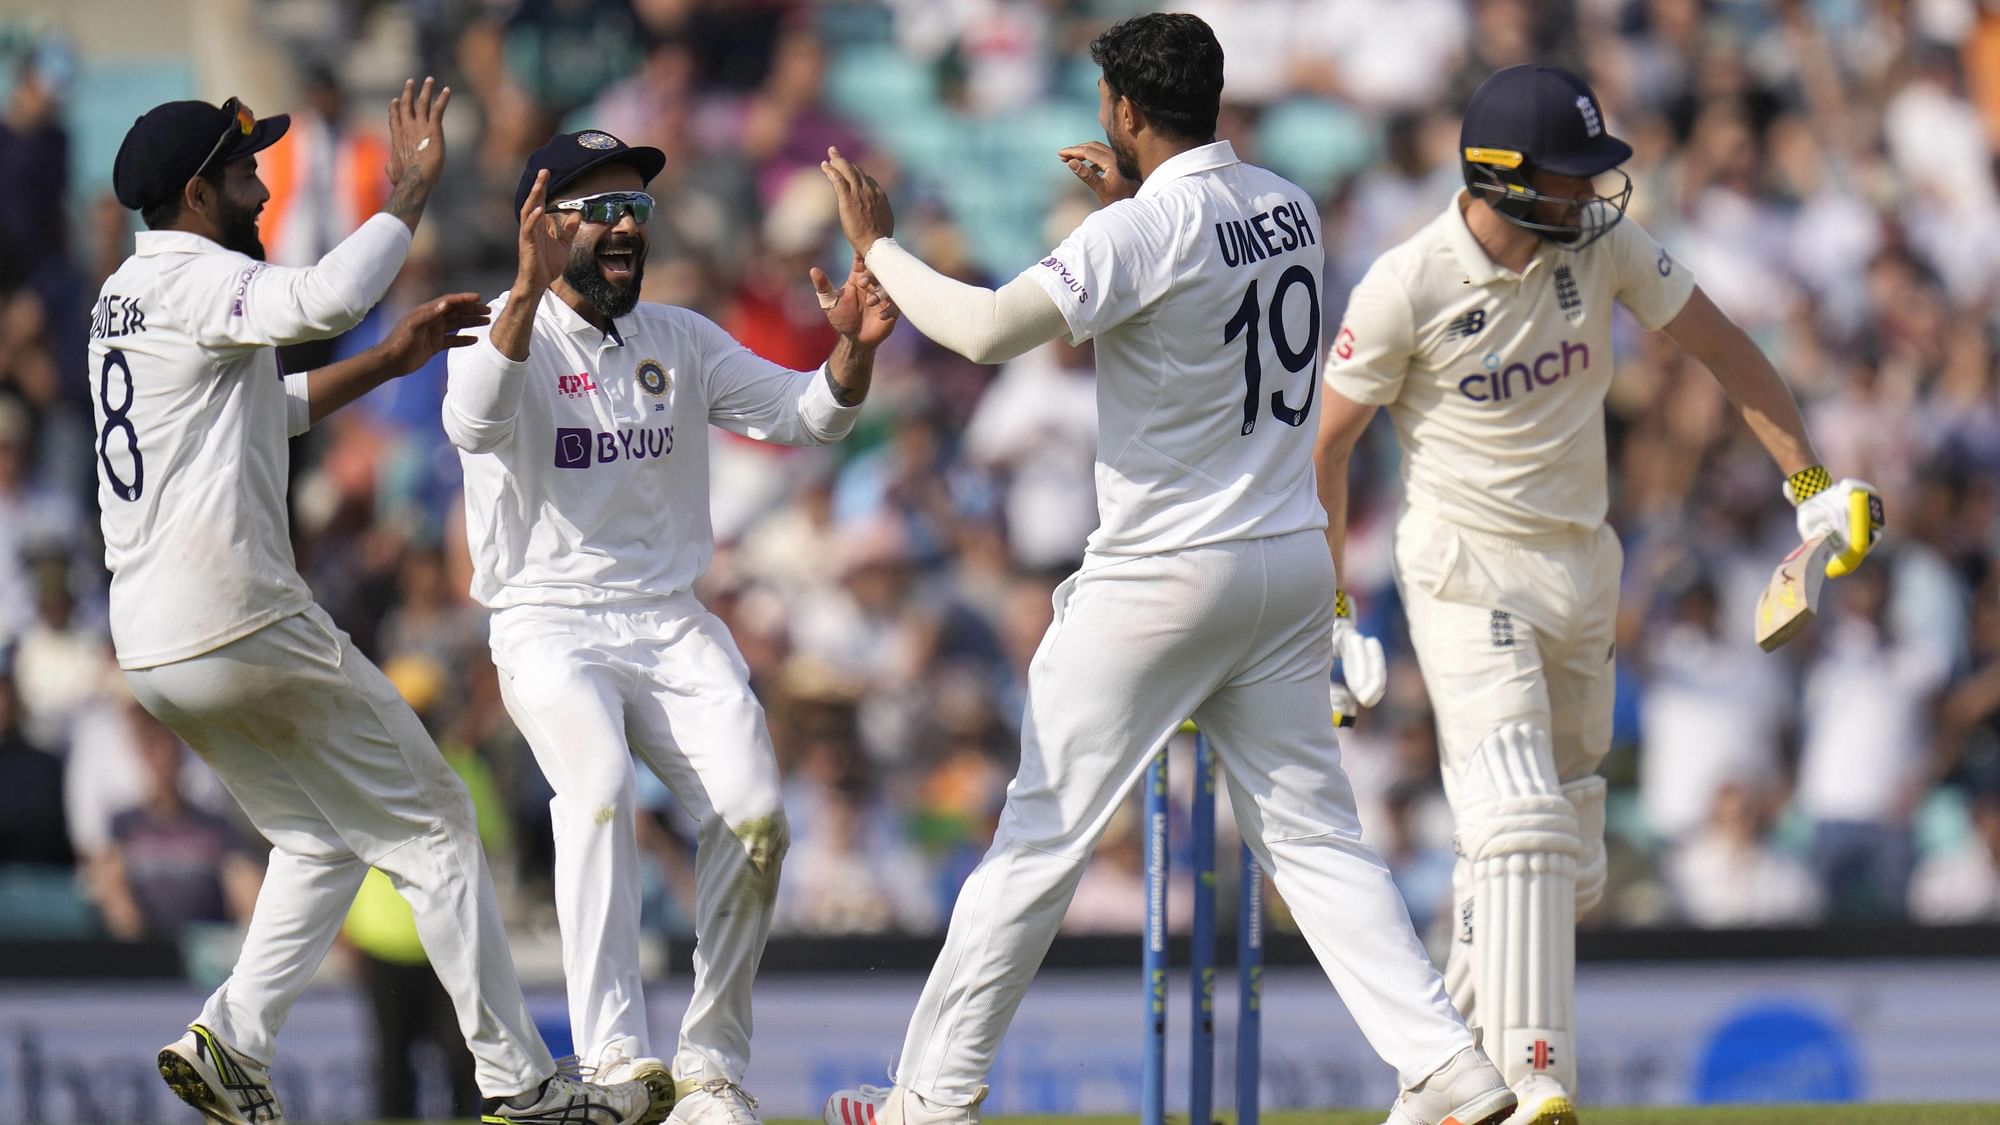 <div class="paragraphs"><p>Jasprit Bumrah and Umesh Yadav were among the pick of the bowlers for India against England at The Oval Test.</p></div>